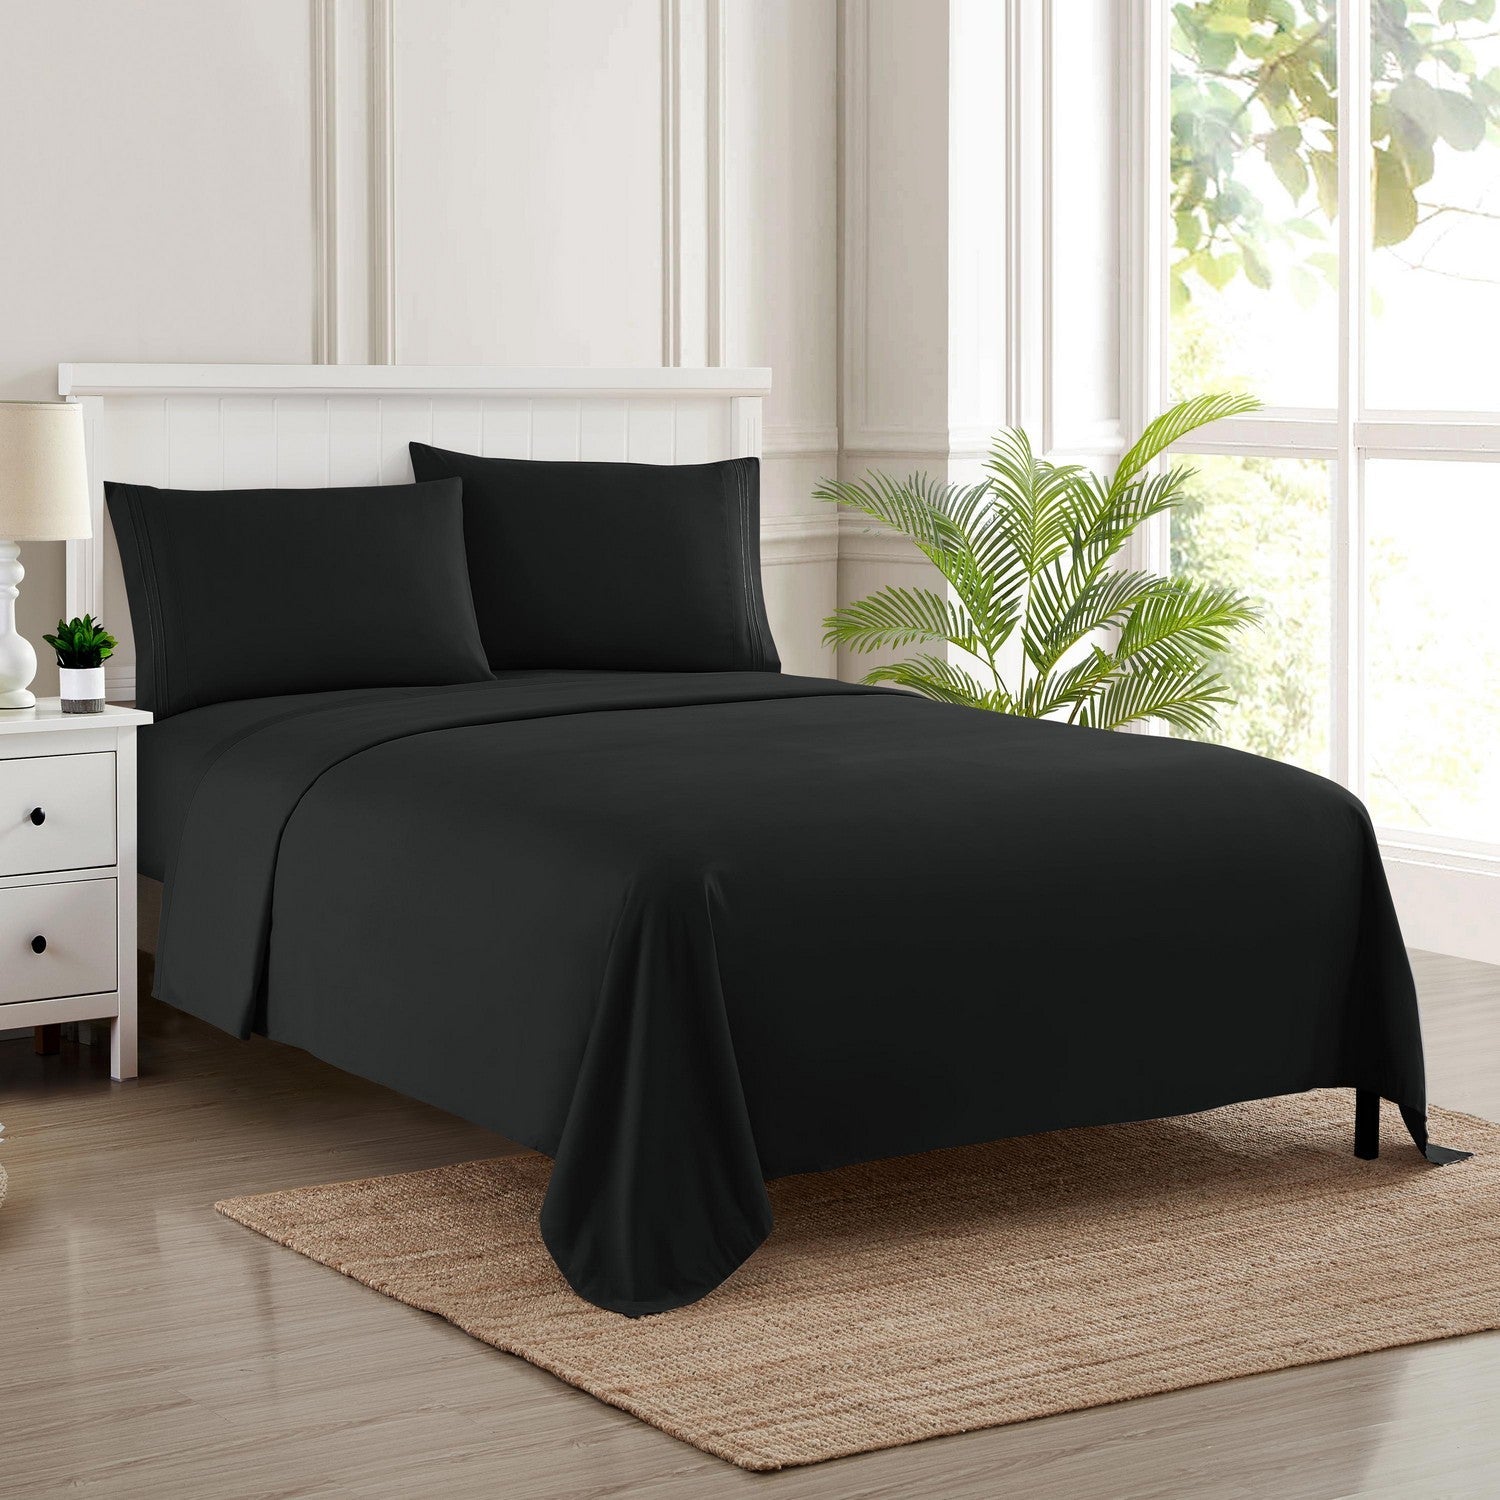 Classic 4-Piece Bed Sheet Set (Black) - Bed